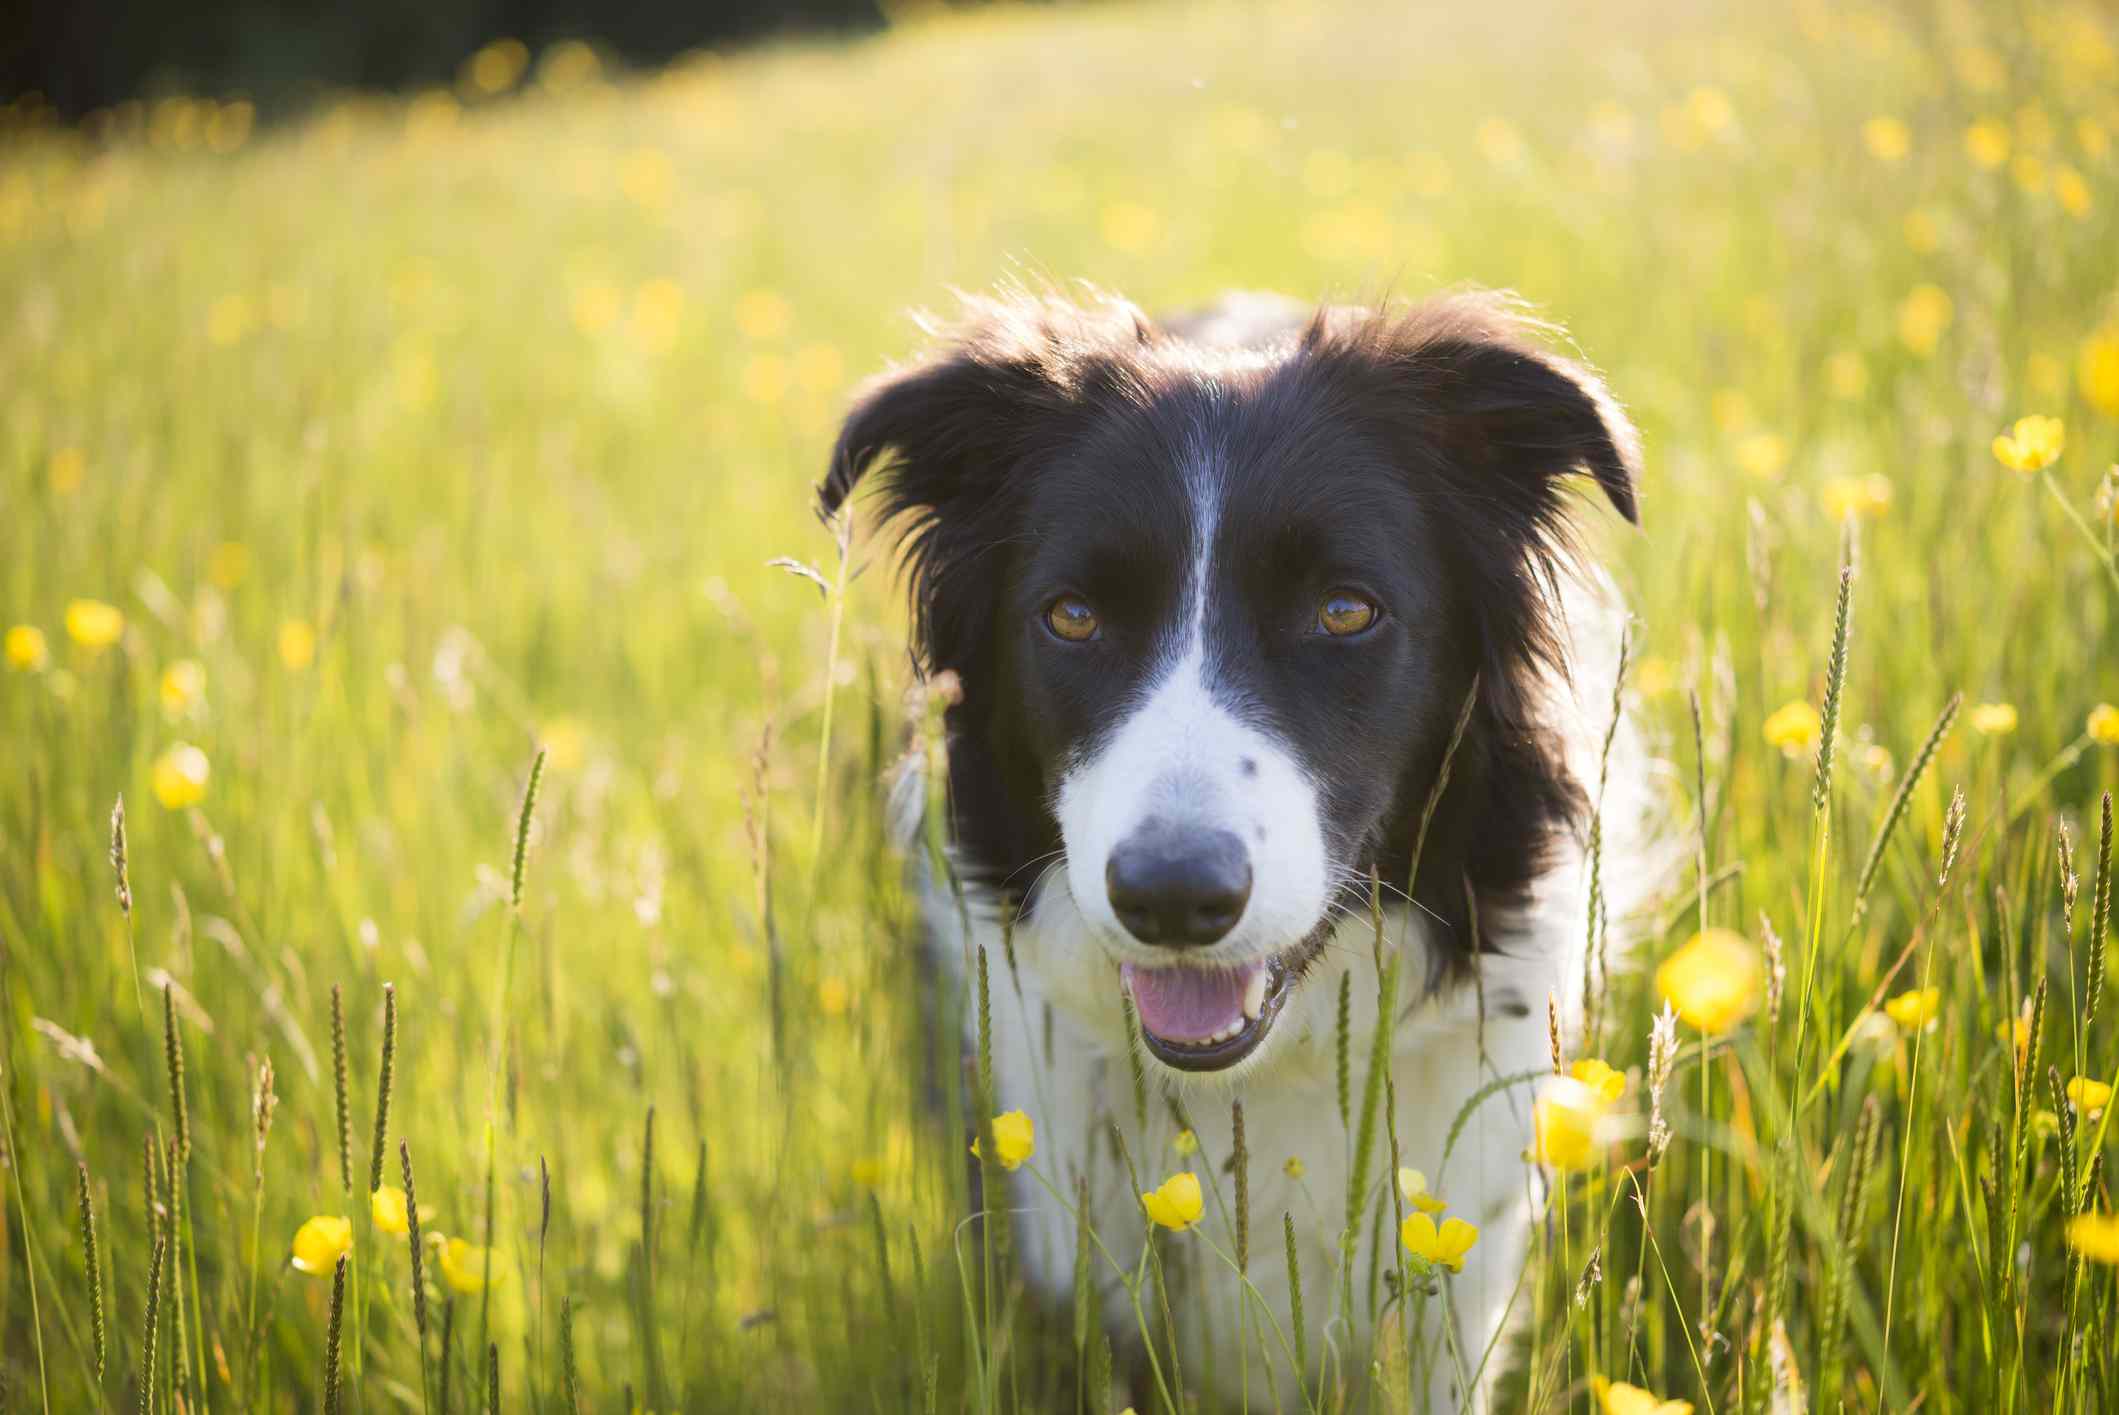 Border Collie in field of tall grass and flowers.